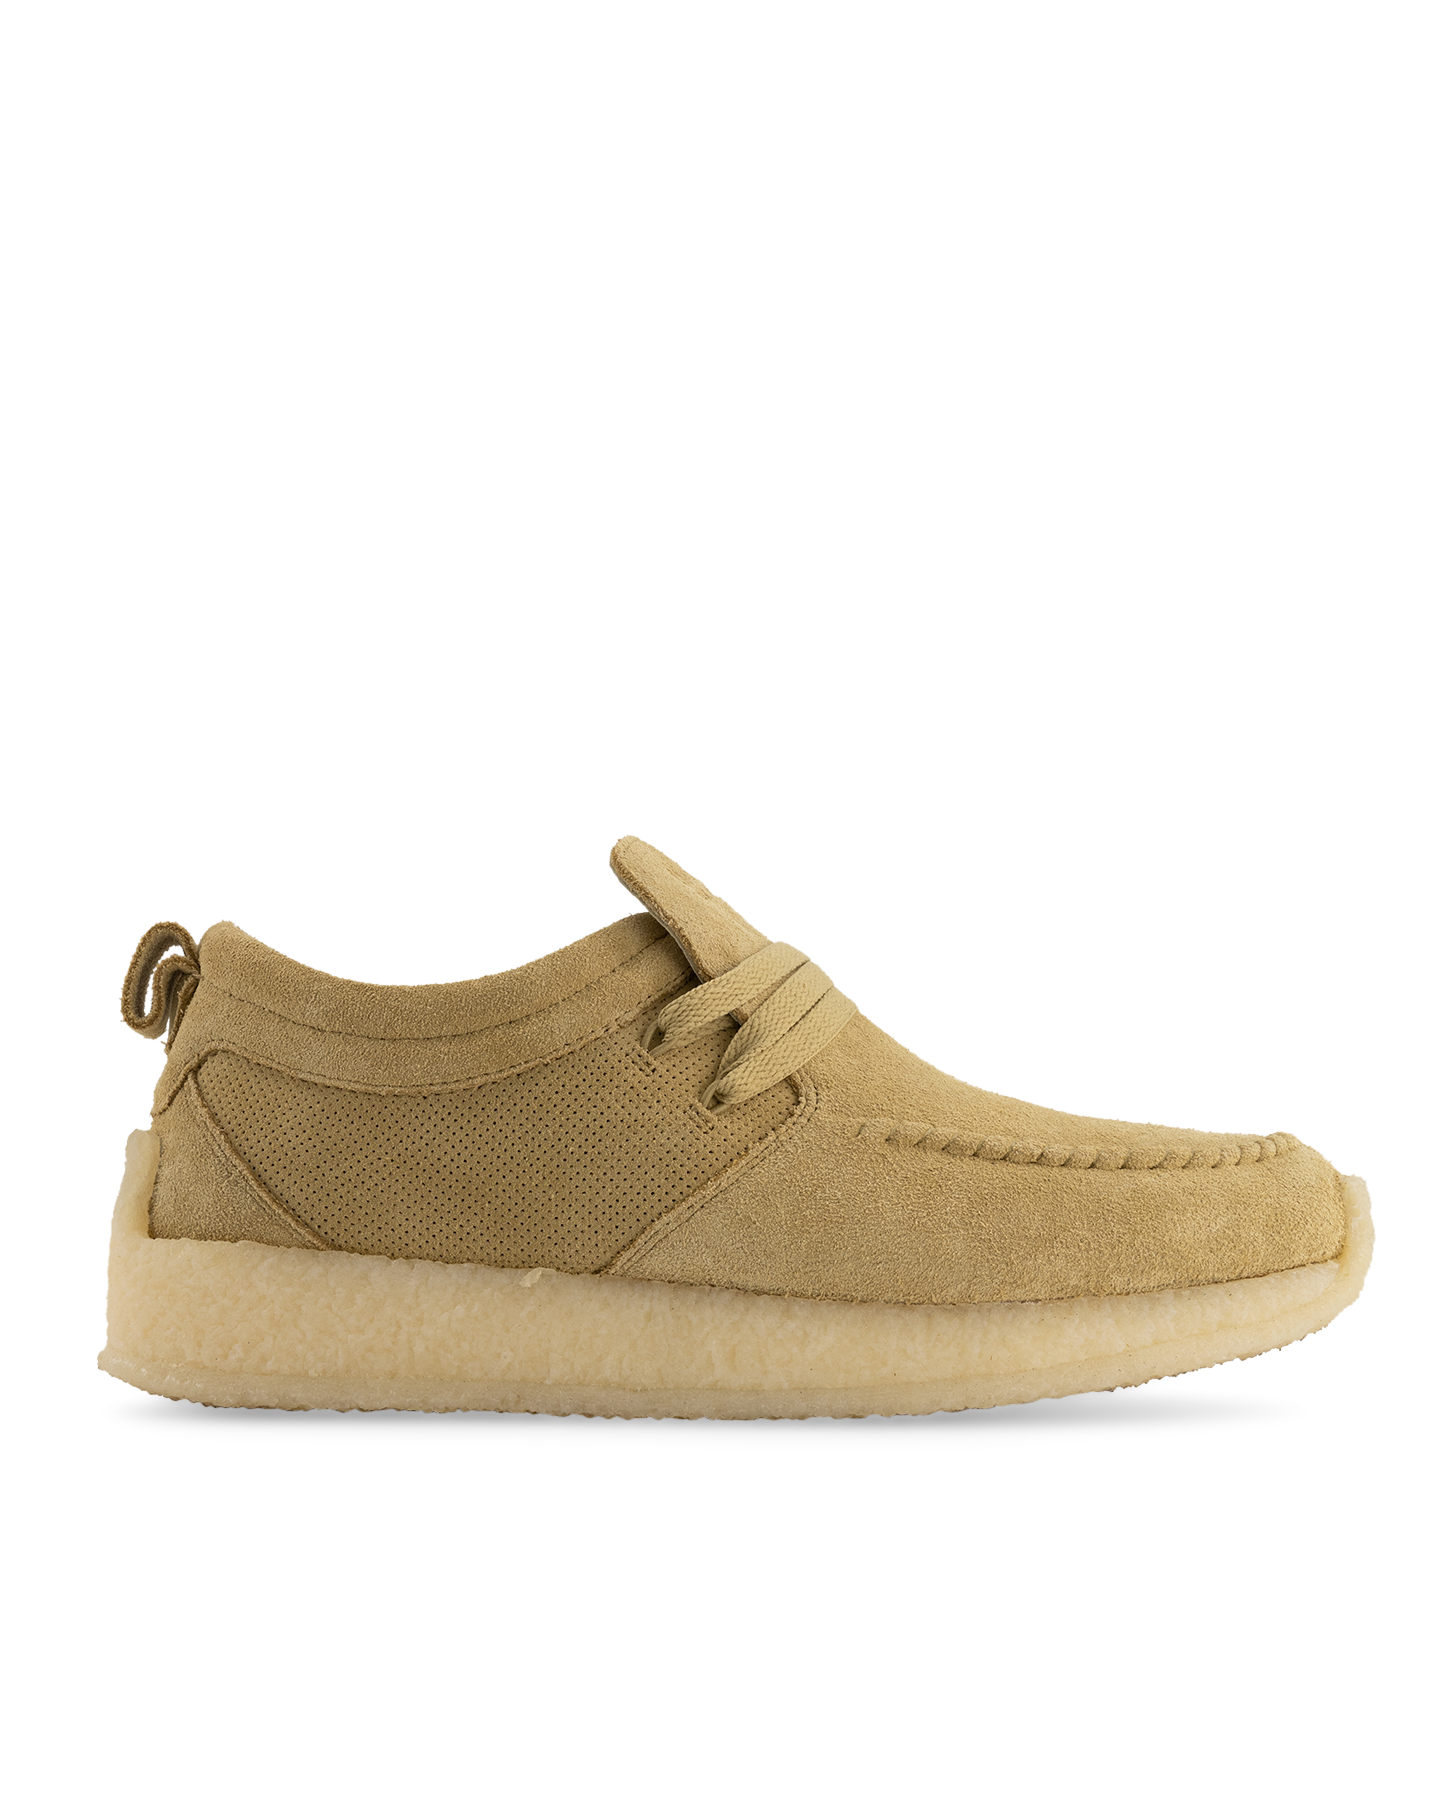 Clarks Maycliffe Maple By Ronnie Fieg BRUIN 1